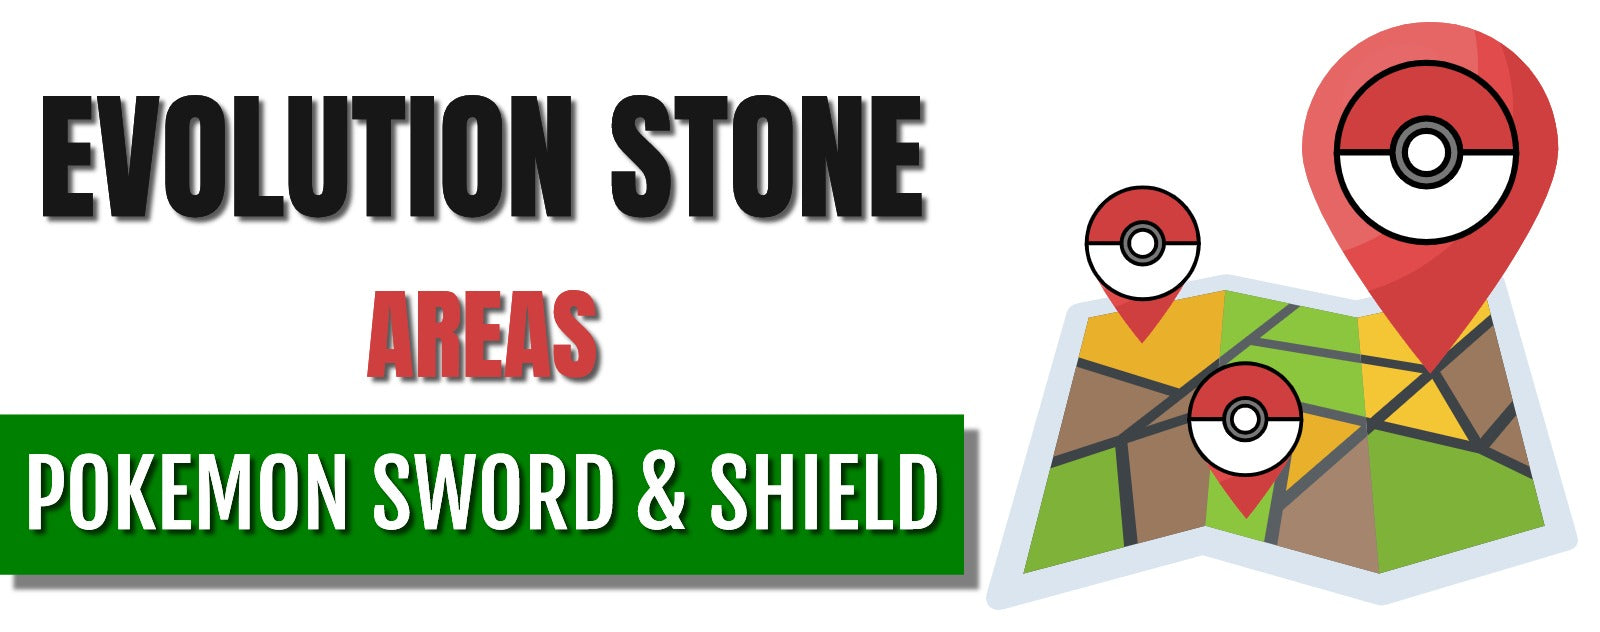 Ensured Evolution Stone areas in Pokémon Sword and Shield